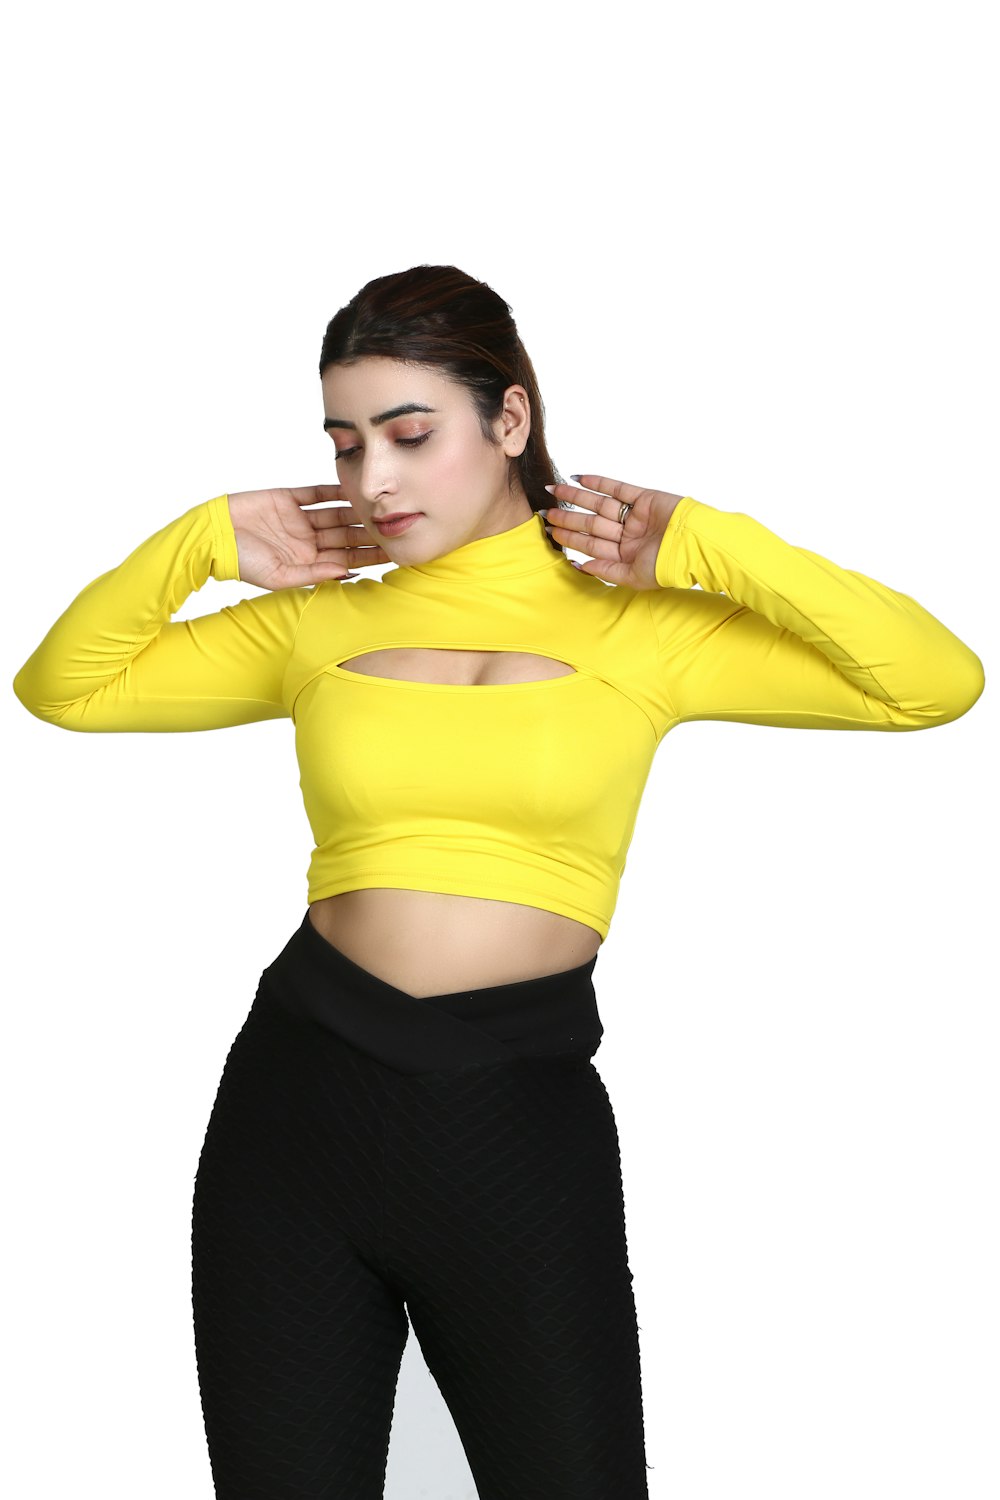 a woman in a yellow top and black pants